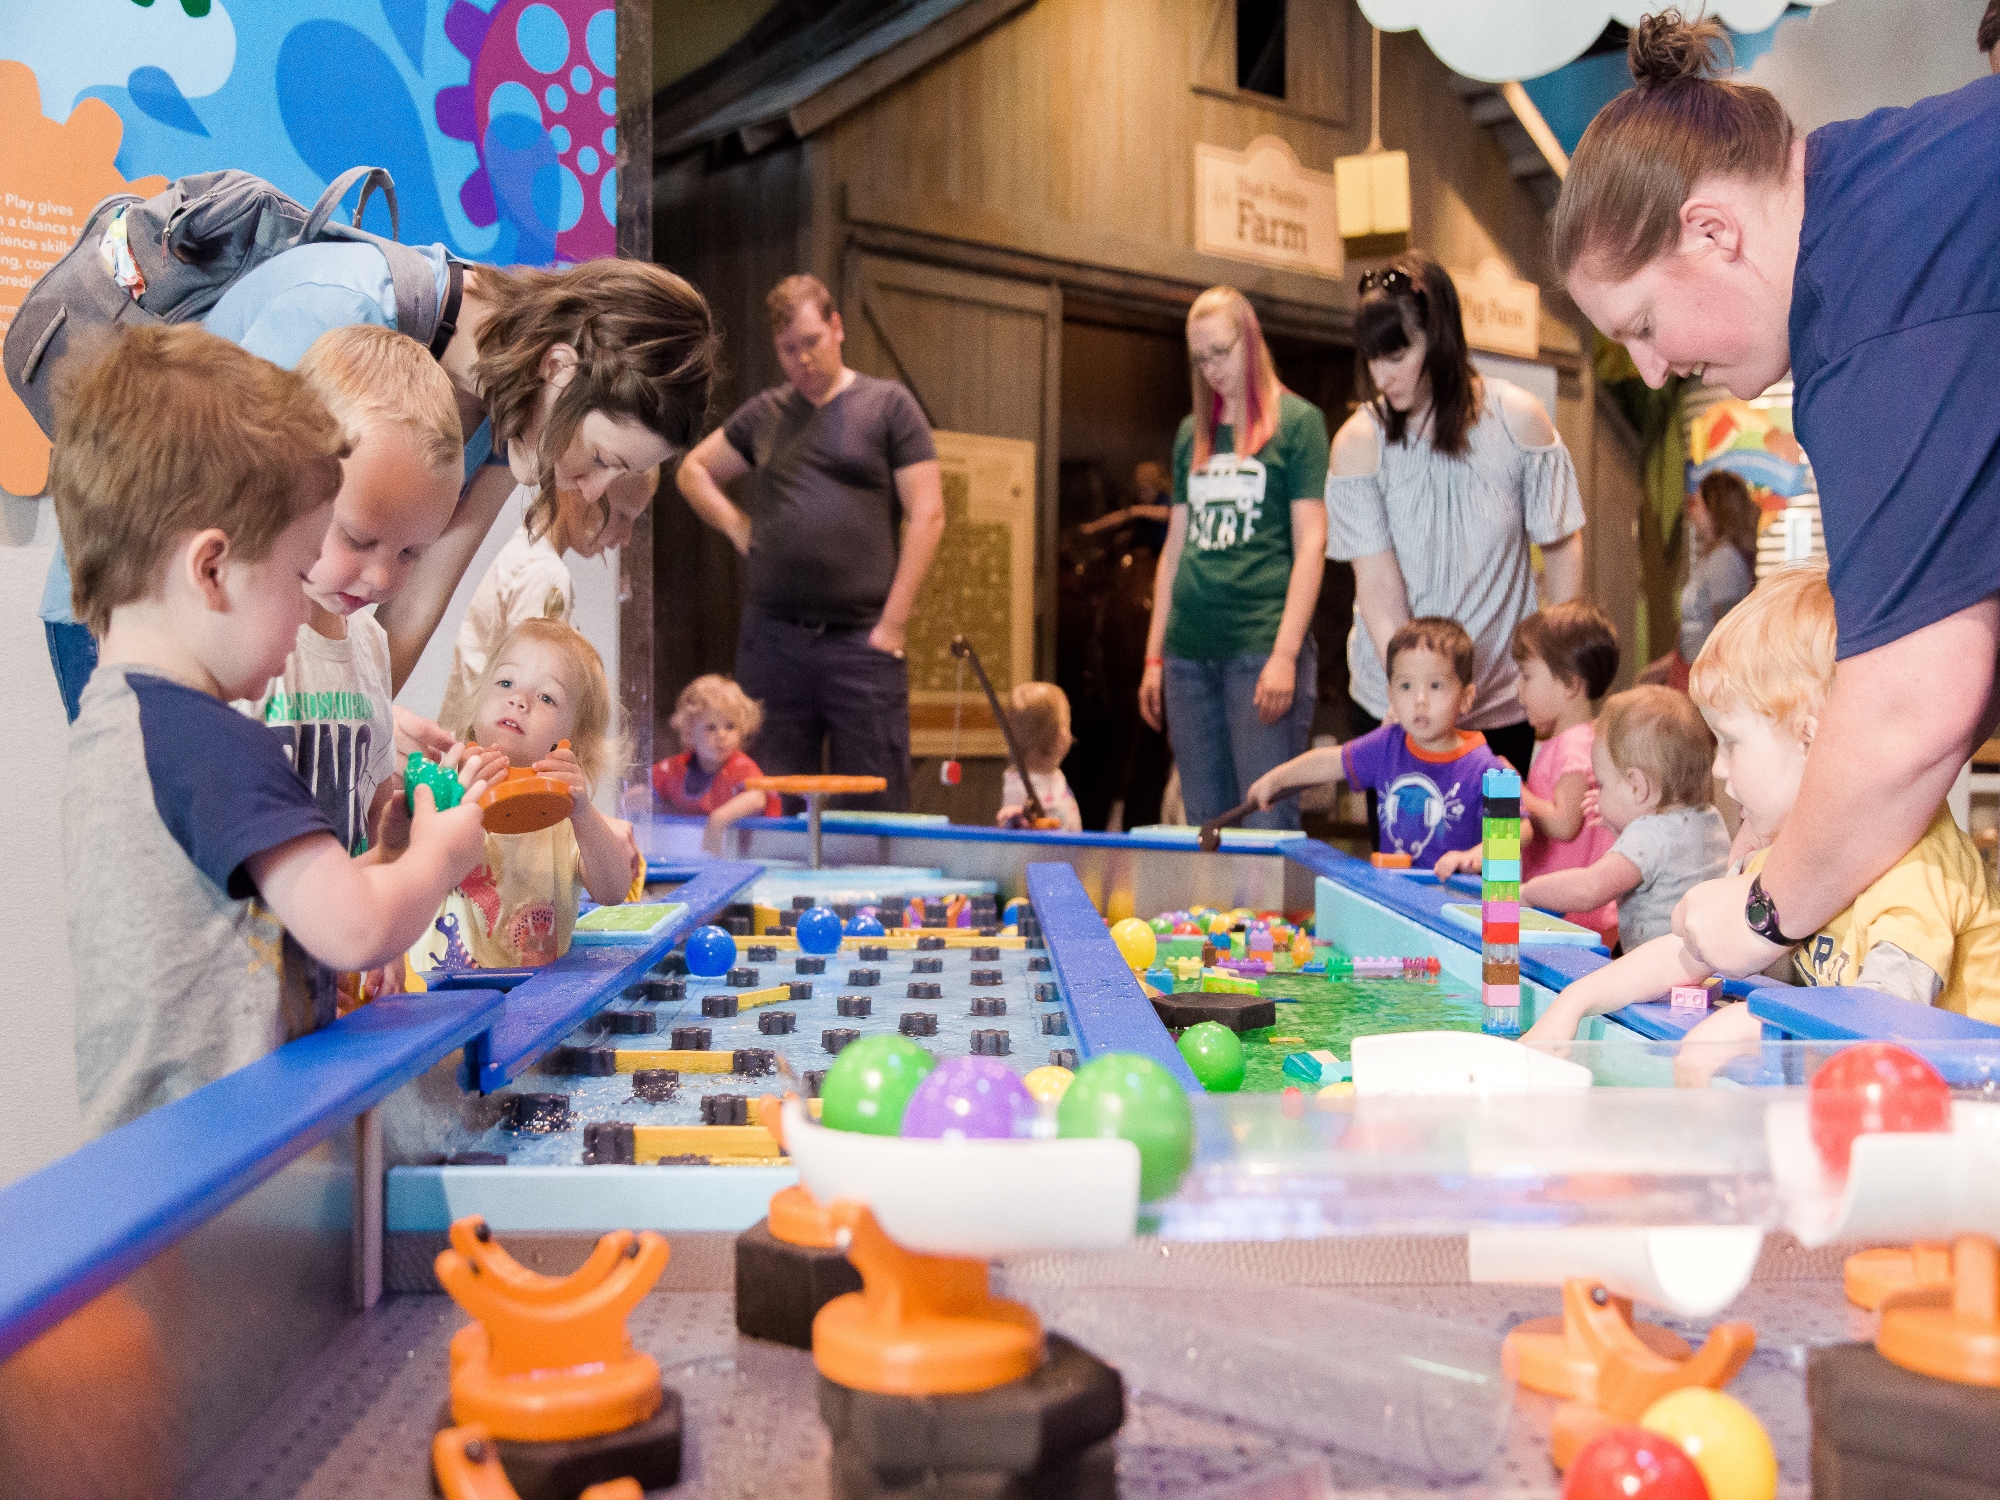 The Water Play Exhibit includes racing rivers, a water wall with tipping buckets, a water vortex and more